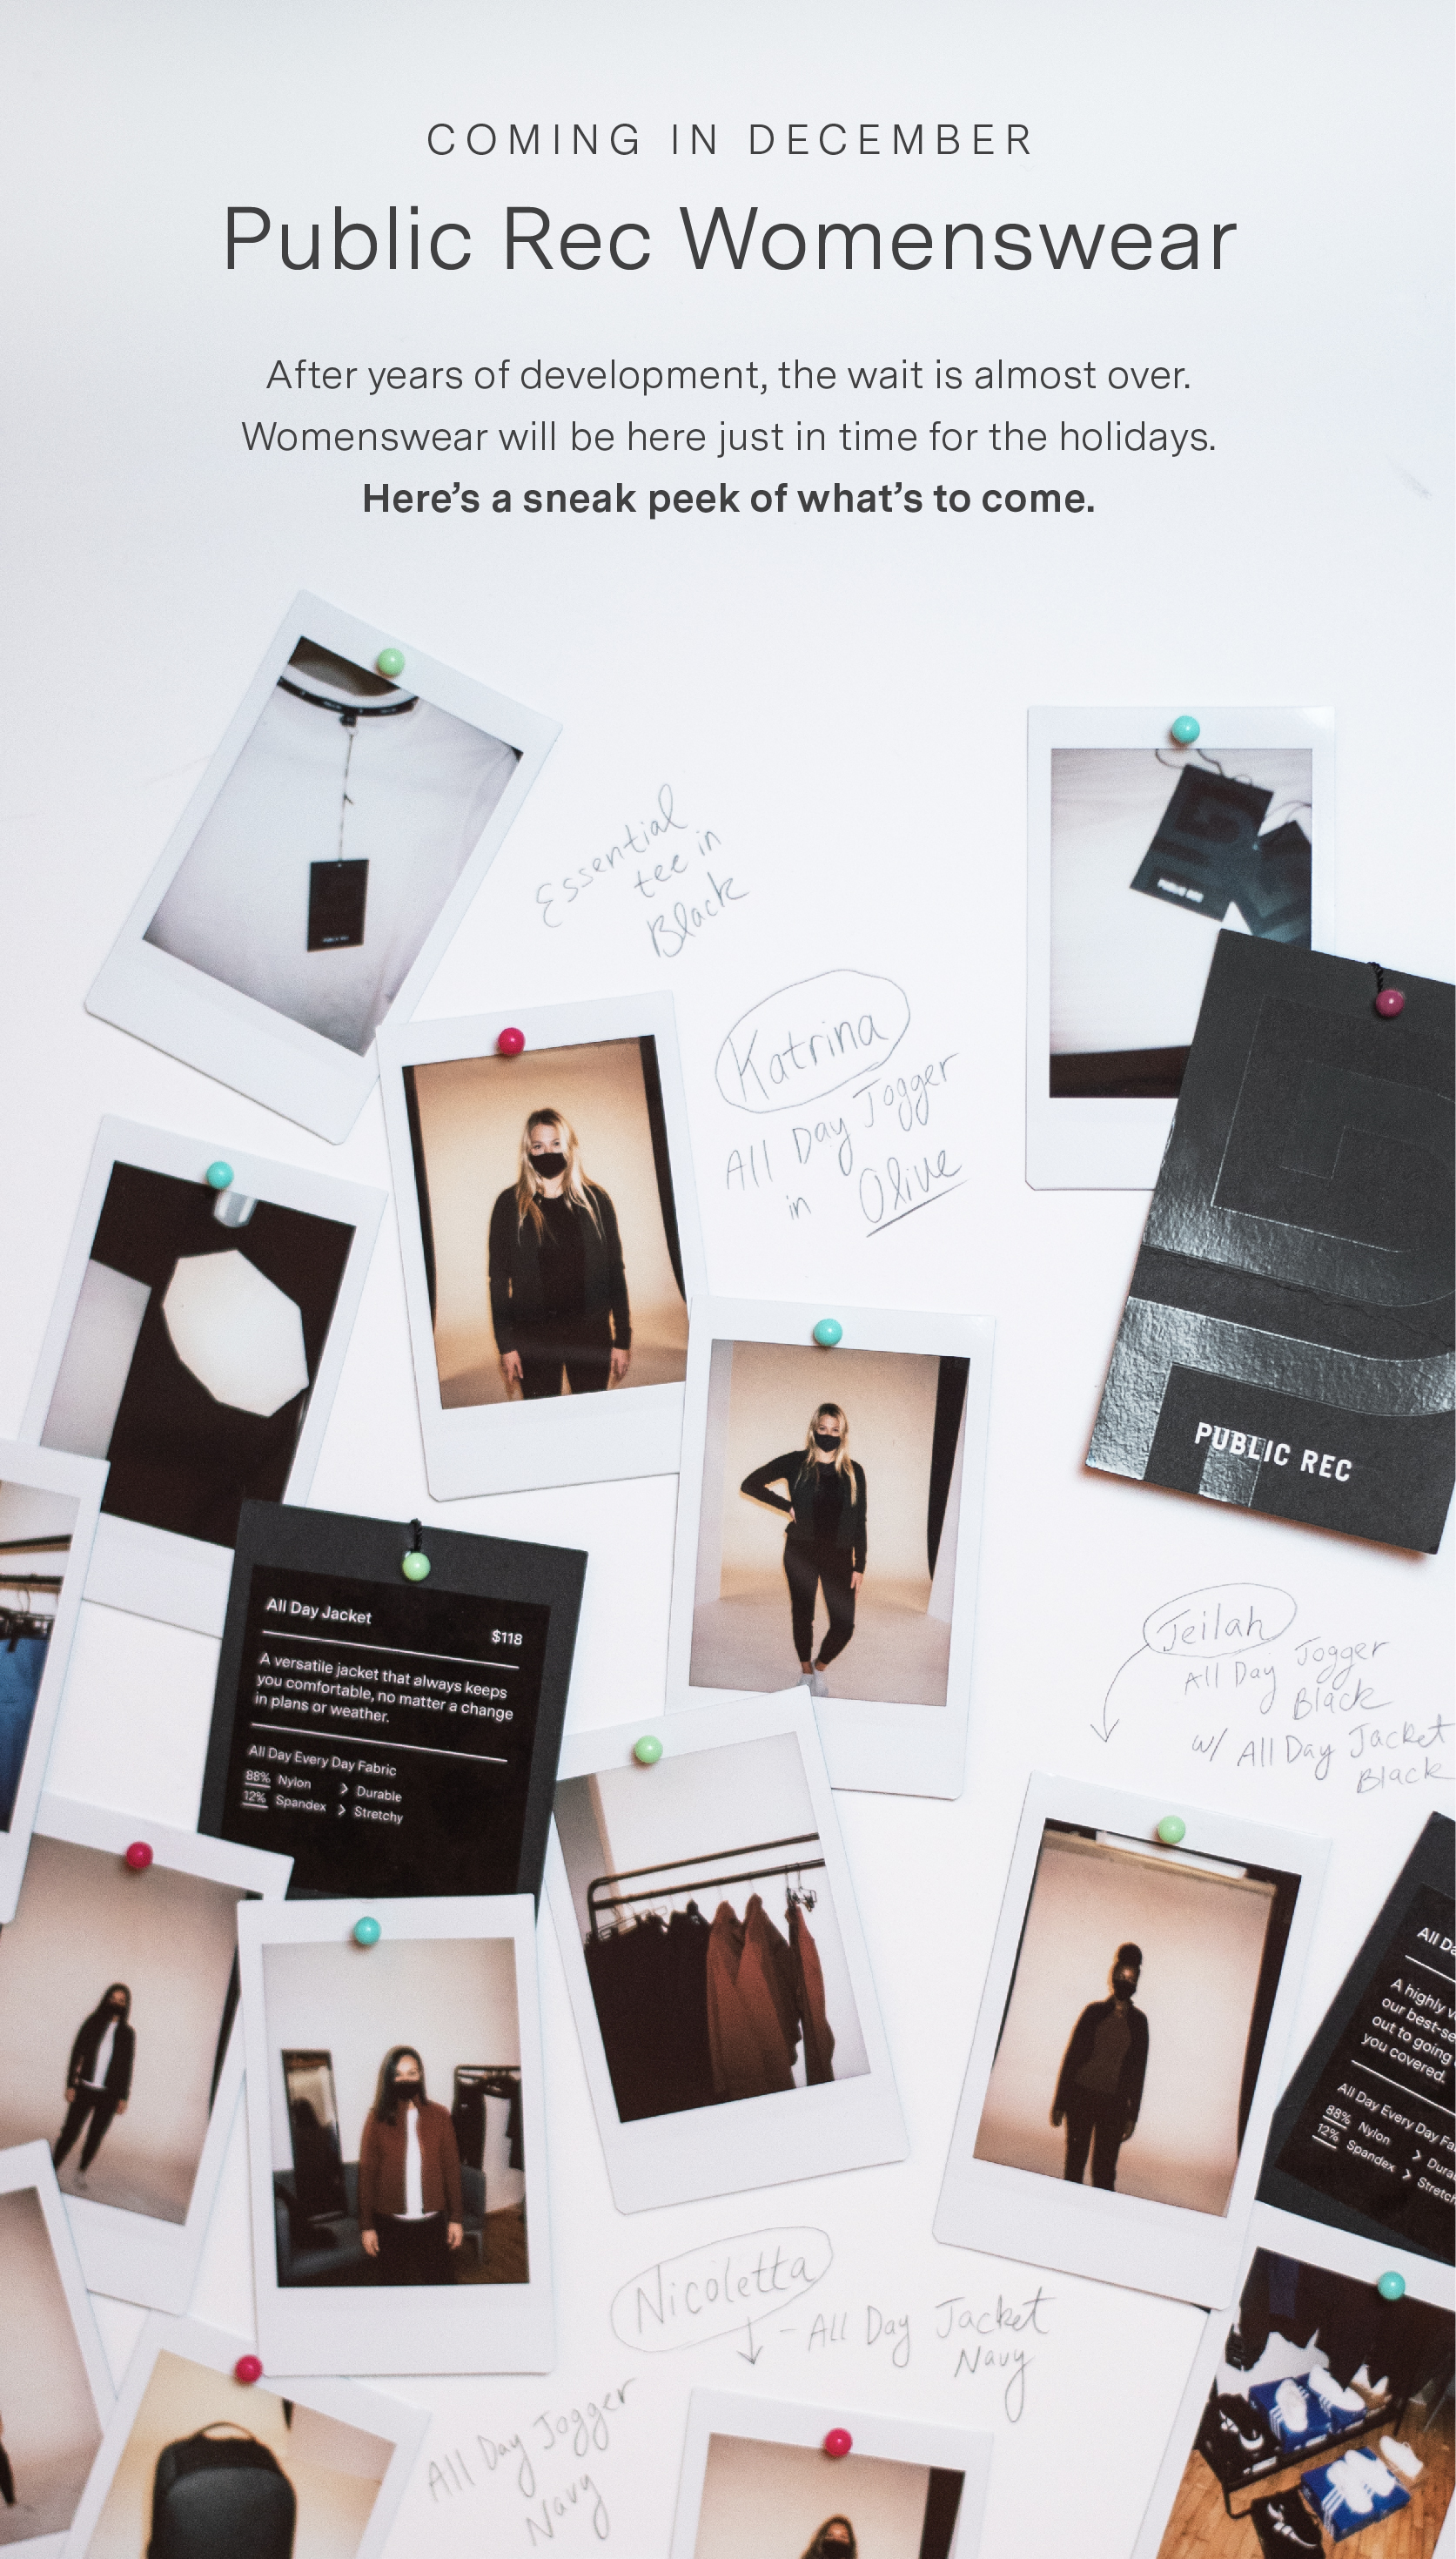 Coming December 2020 - After years of development, the wait is almost over. Womenswear will be here just in time for the holidays. Here''s a sneak peek of what''s to come. Image Description - Instax photos pinned on white board, showcasing female models and sneak peeks of new items to be launched with Public Rec Womens.)